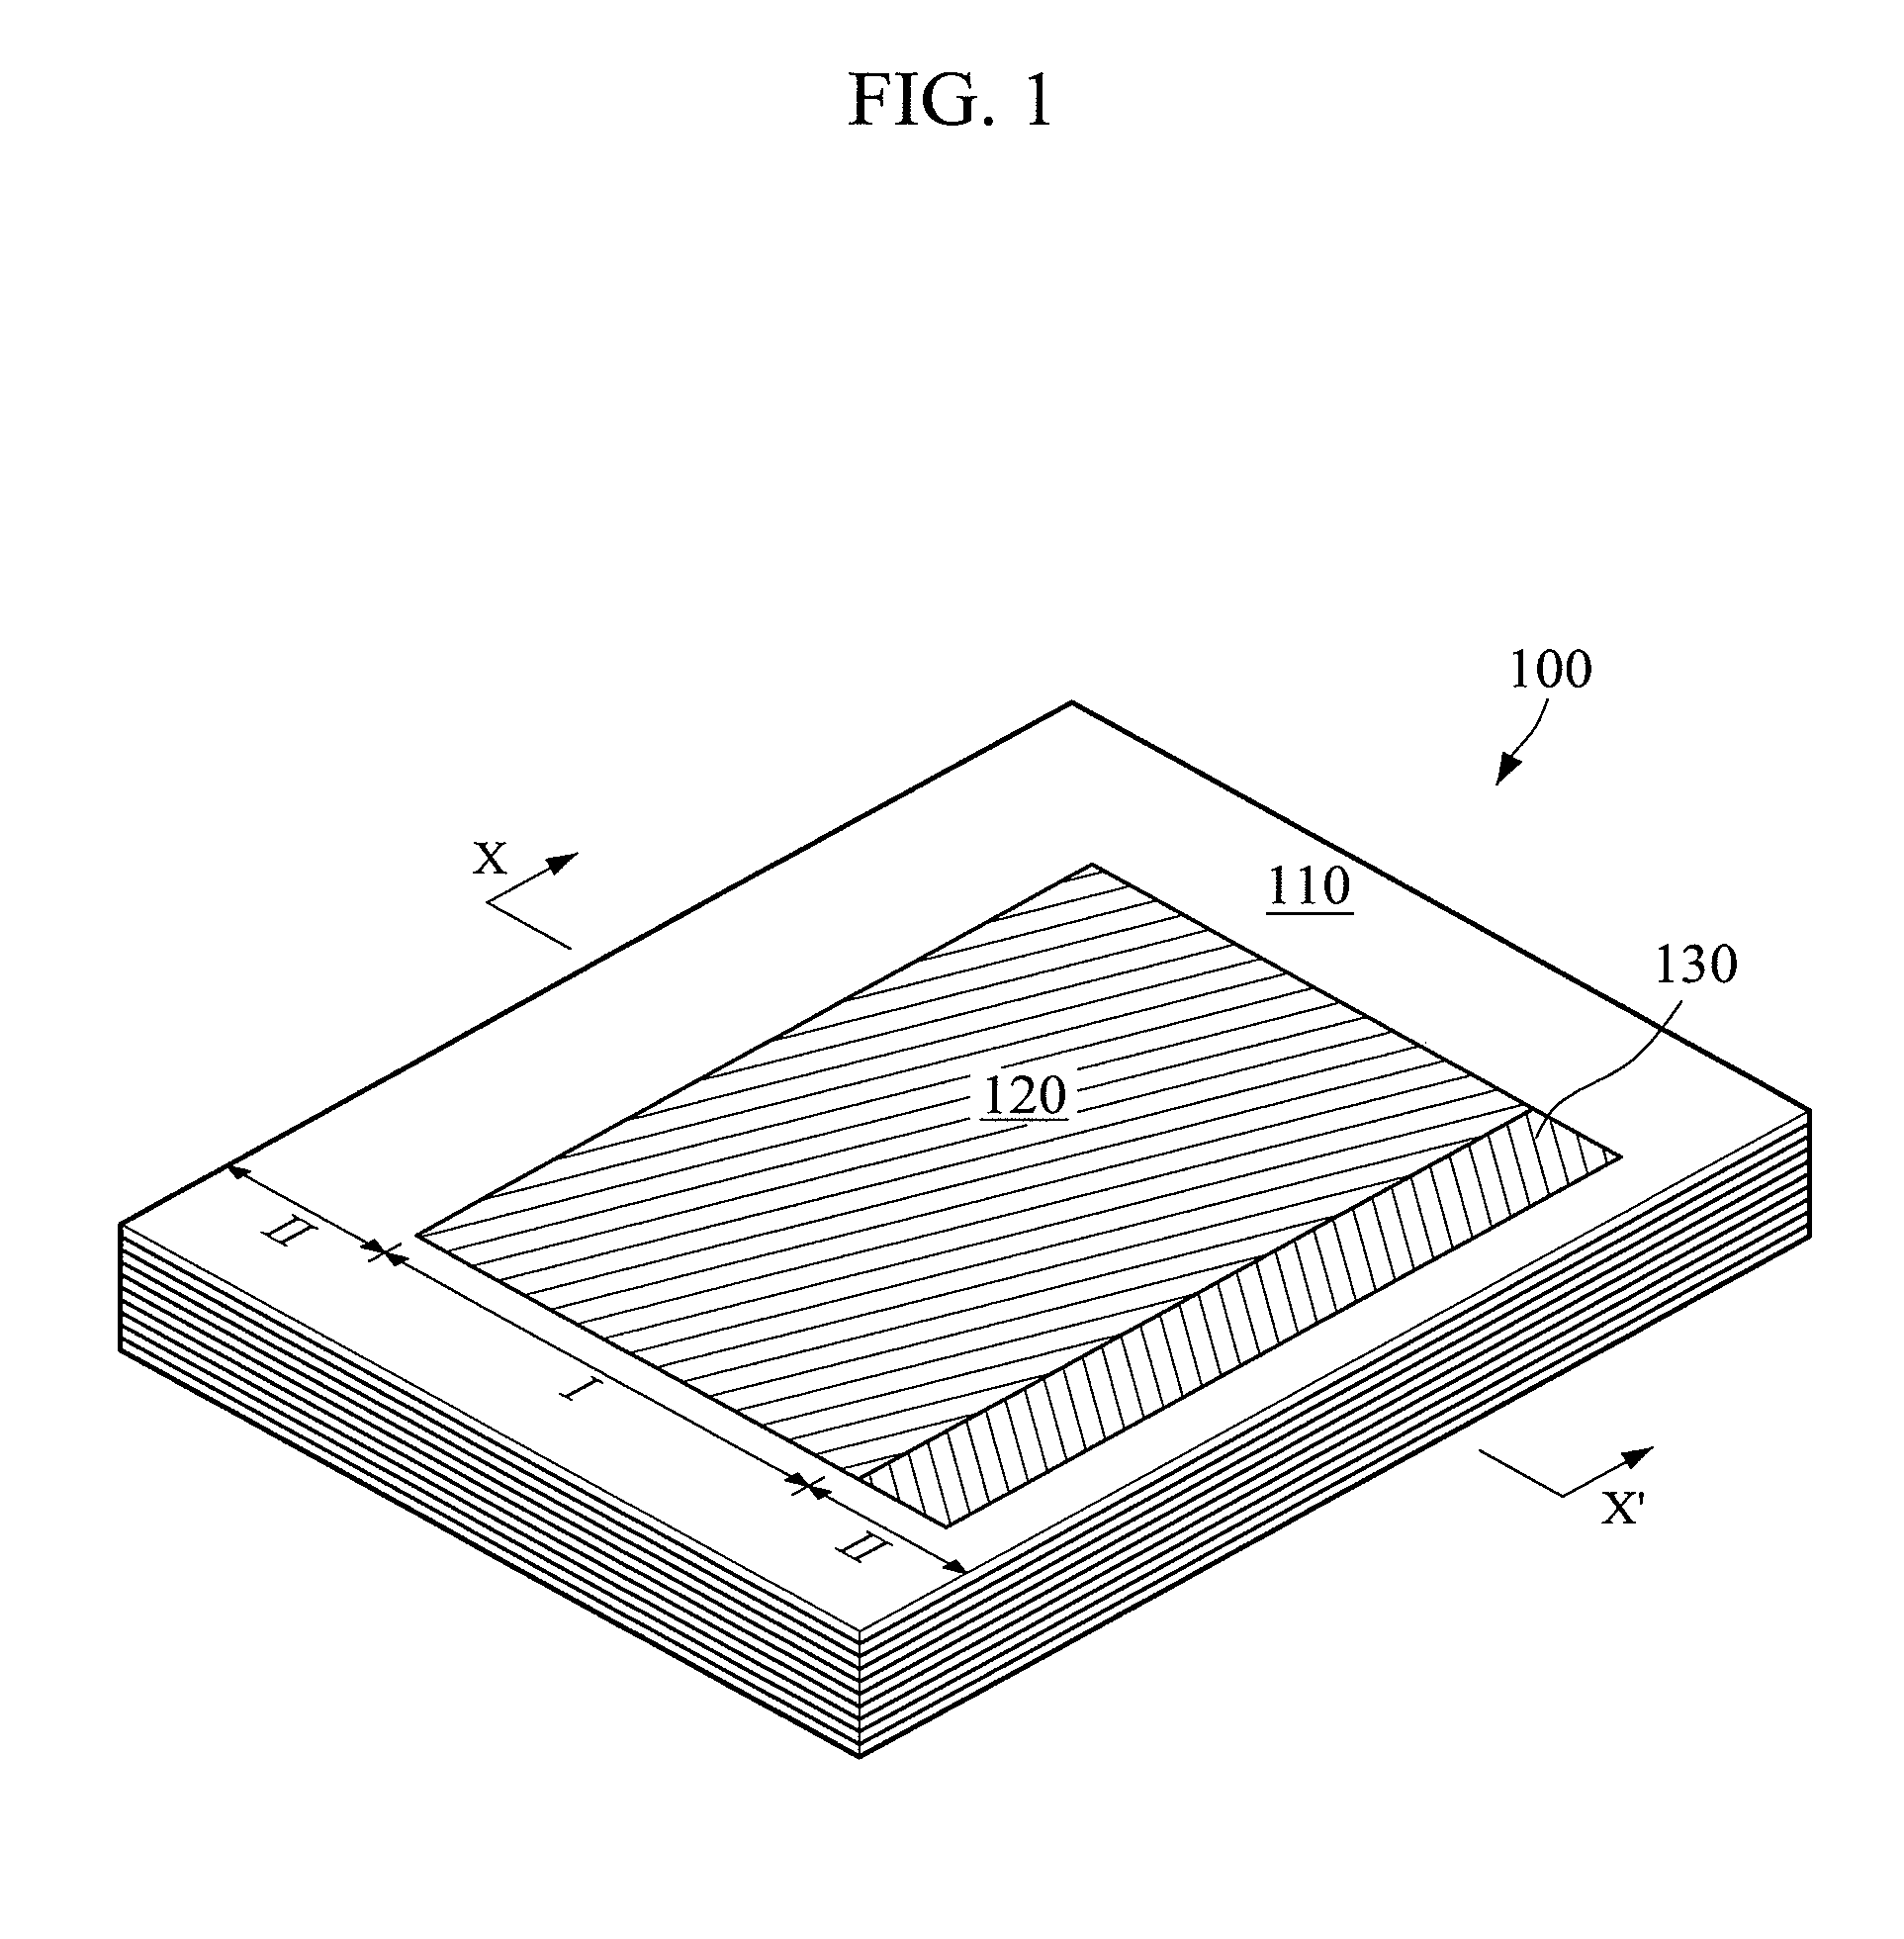 Electroactive polymer actuator and method of manufacturing the same